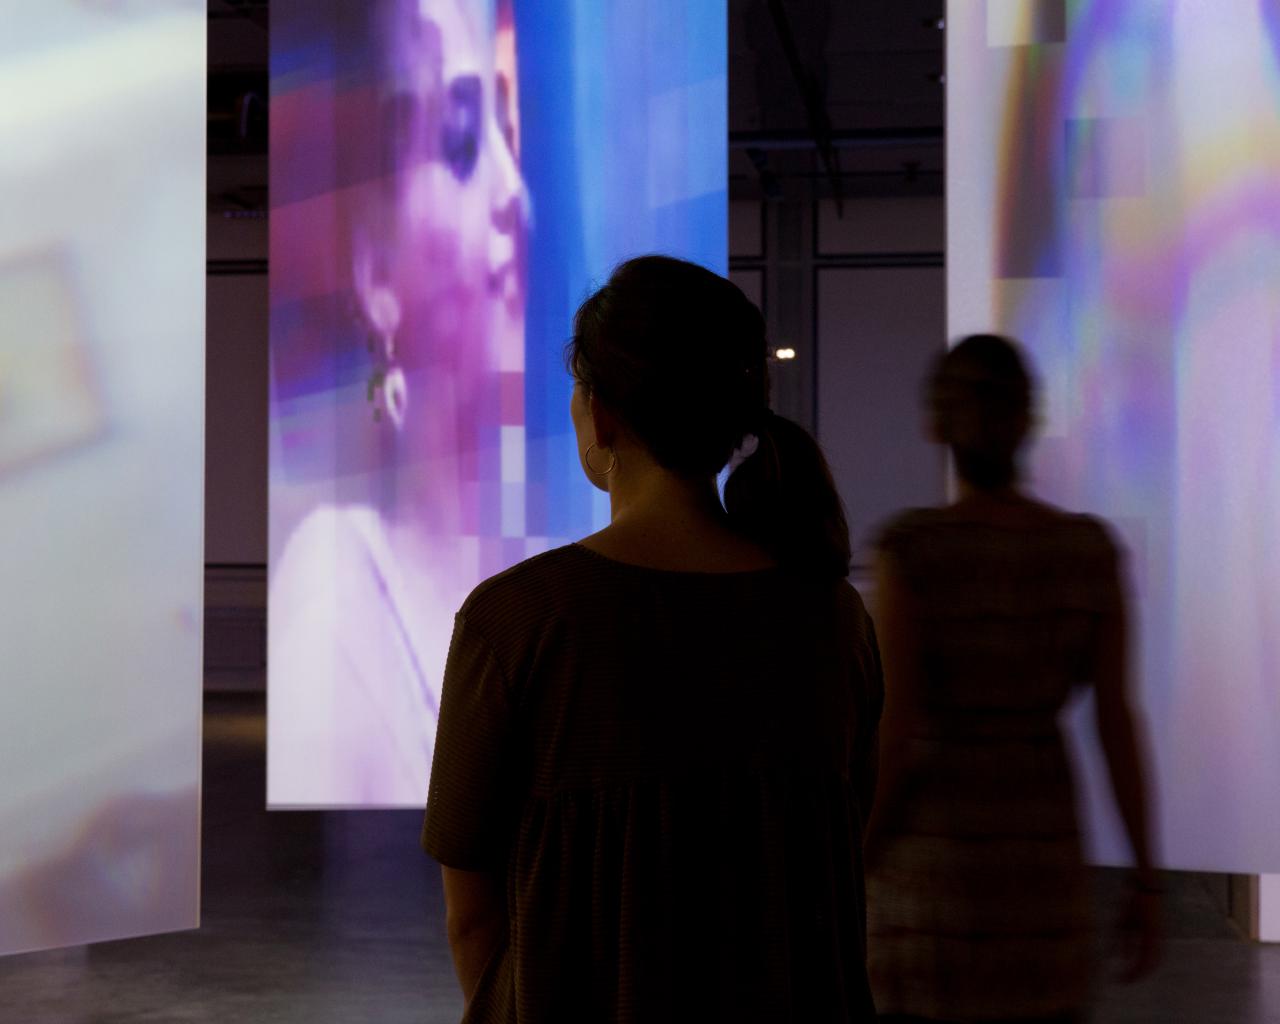 The silhouettes of two visitors in front of filmed screens